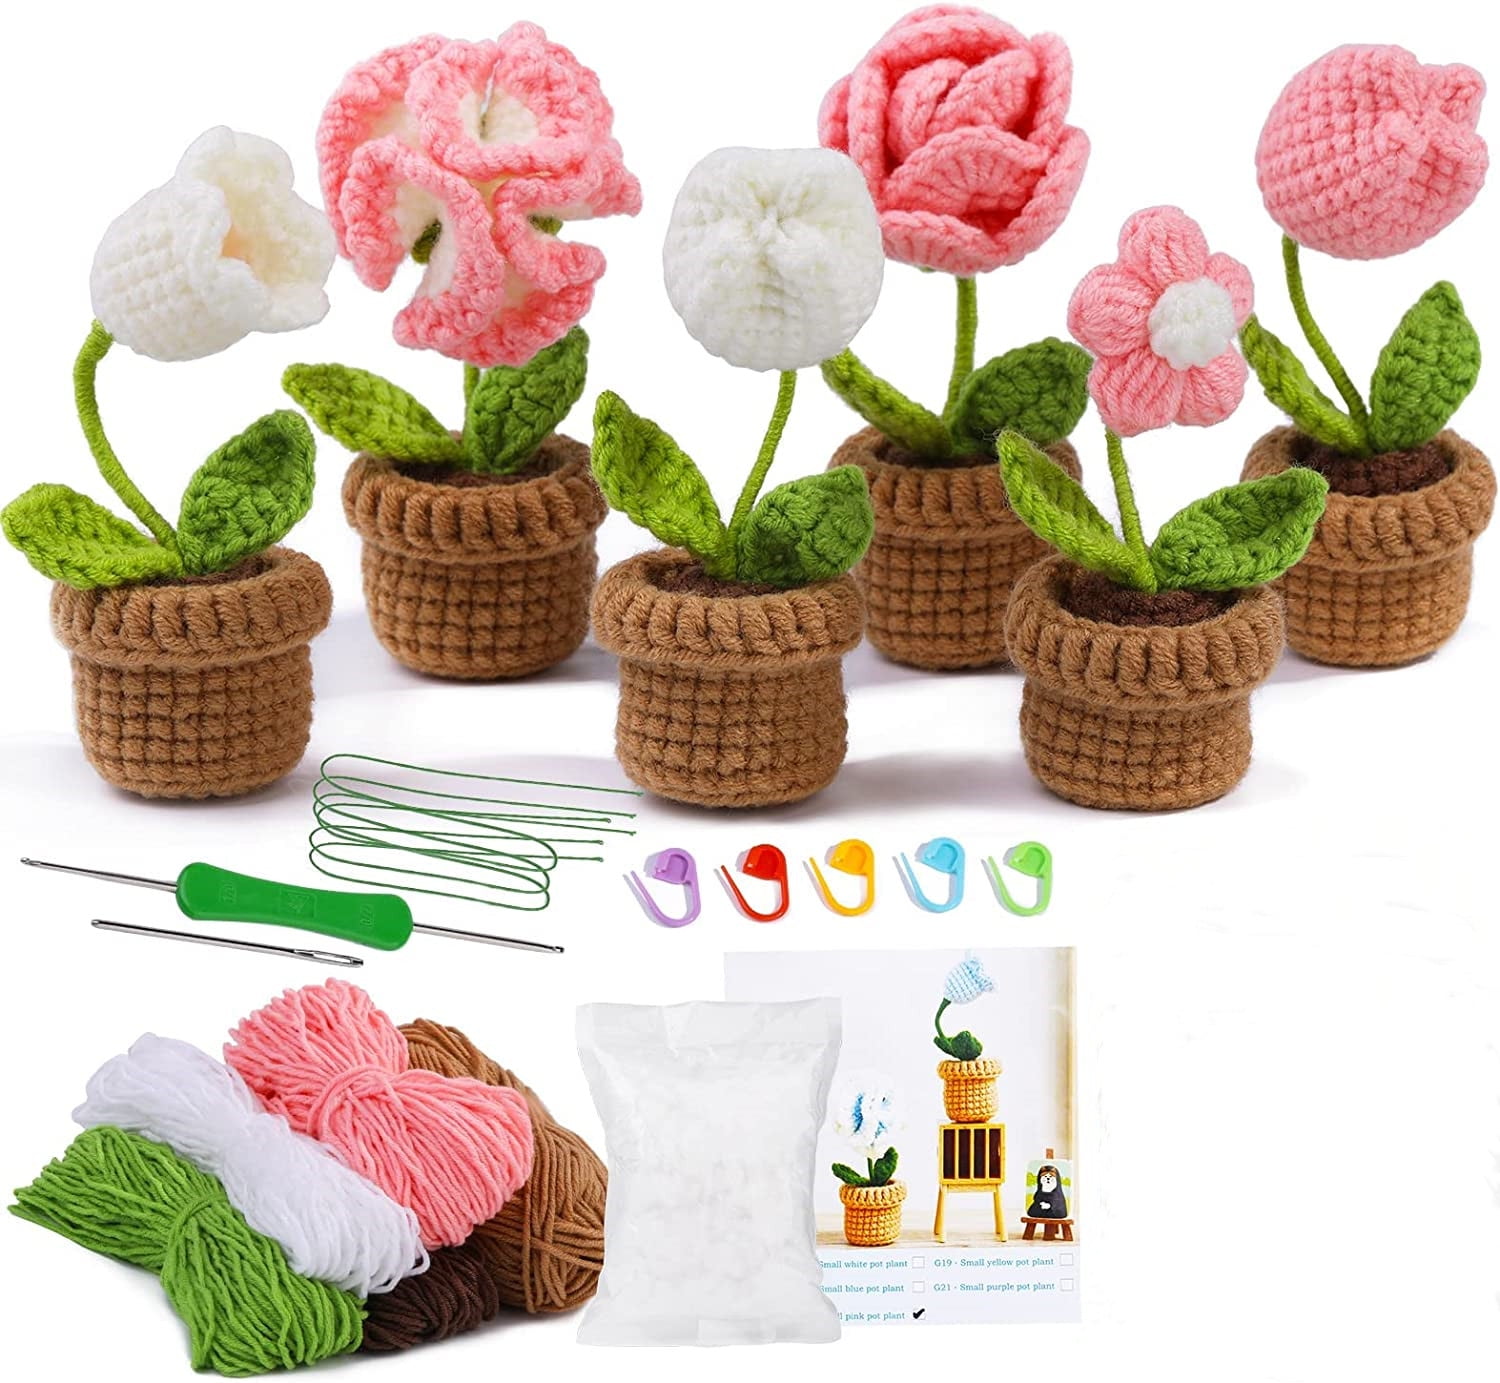 Qunland New Crochet Kit for Beginners, 6 Pcs Potted Flowers DIY Kit for  Adults and Kids, Crochet Starter Knitting Kit for Complete Beginners with